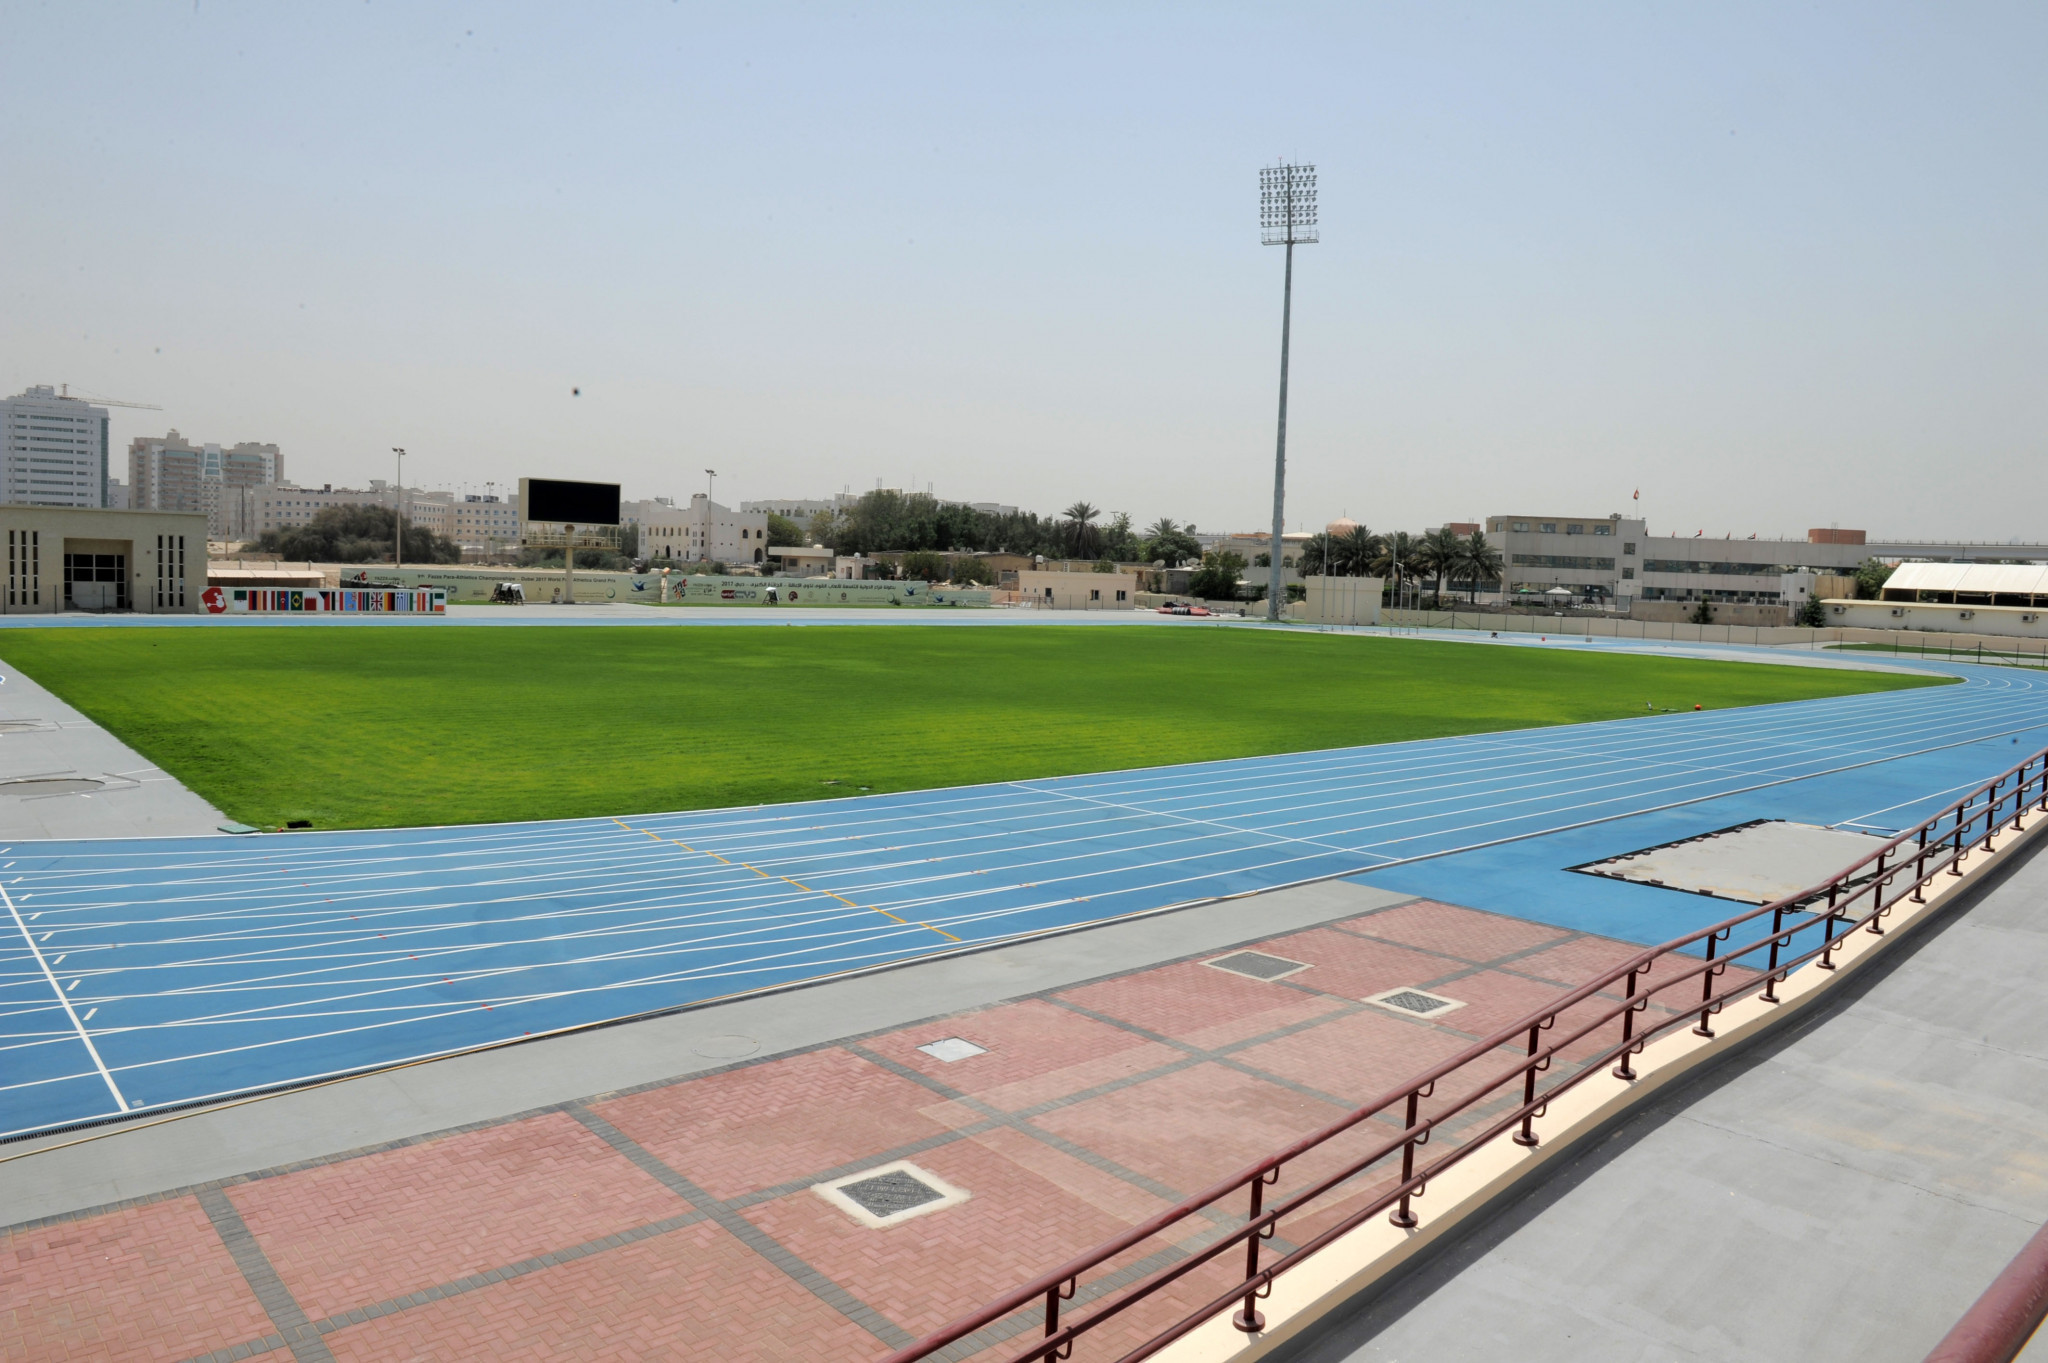 The 2019 World Para Athletics Championships will be held at the Dubai Club for People of Determination's new athletics stadium ©Dubai Club for People of Determination